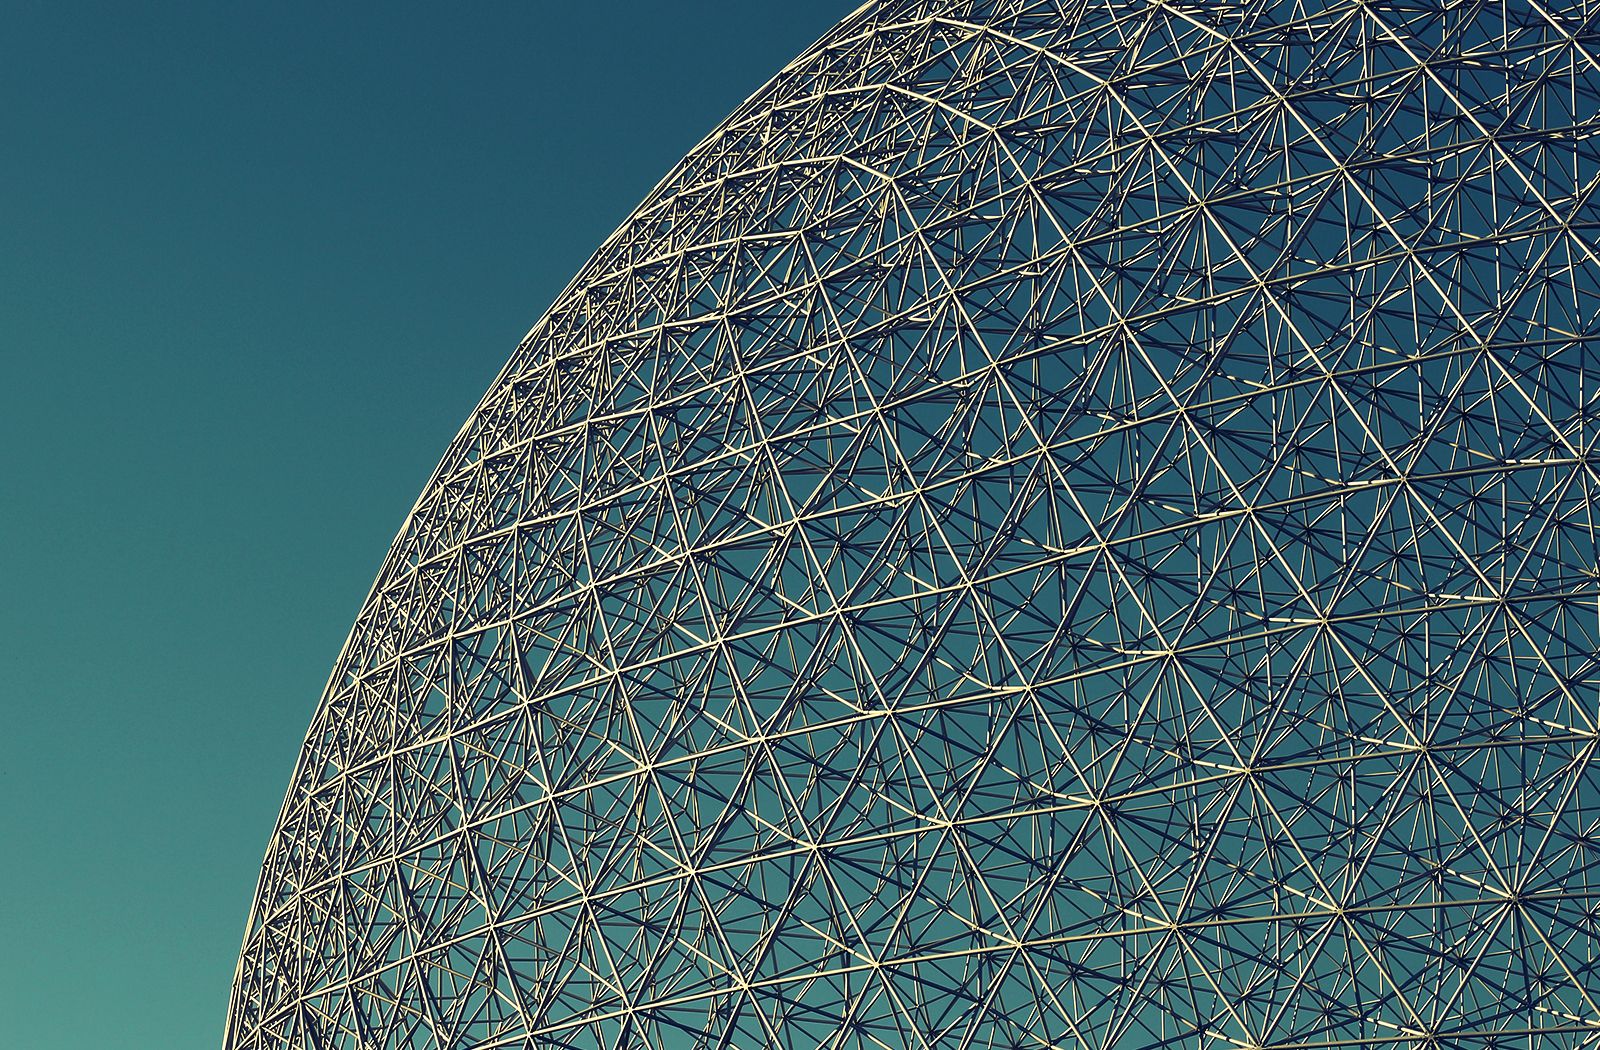 Wallpaper, Montreal, biosphere, architecture, summer, steel, dome, sky, blue, minimalism, structure, shell, sphere, planet, expo, pattern, geodesicdome, lines, shine, Canon, eos, dsrl, aquigabo, rebel, t5i, 700d, 50mm, simplicity, icon, composition